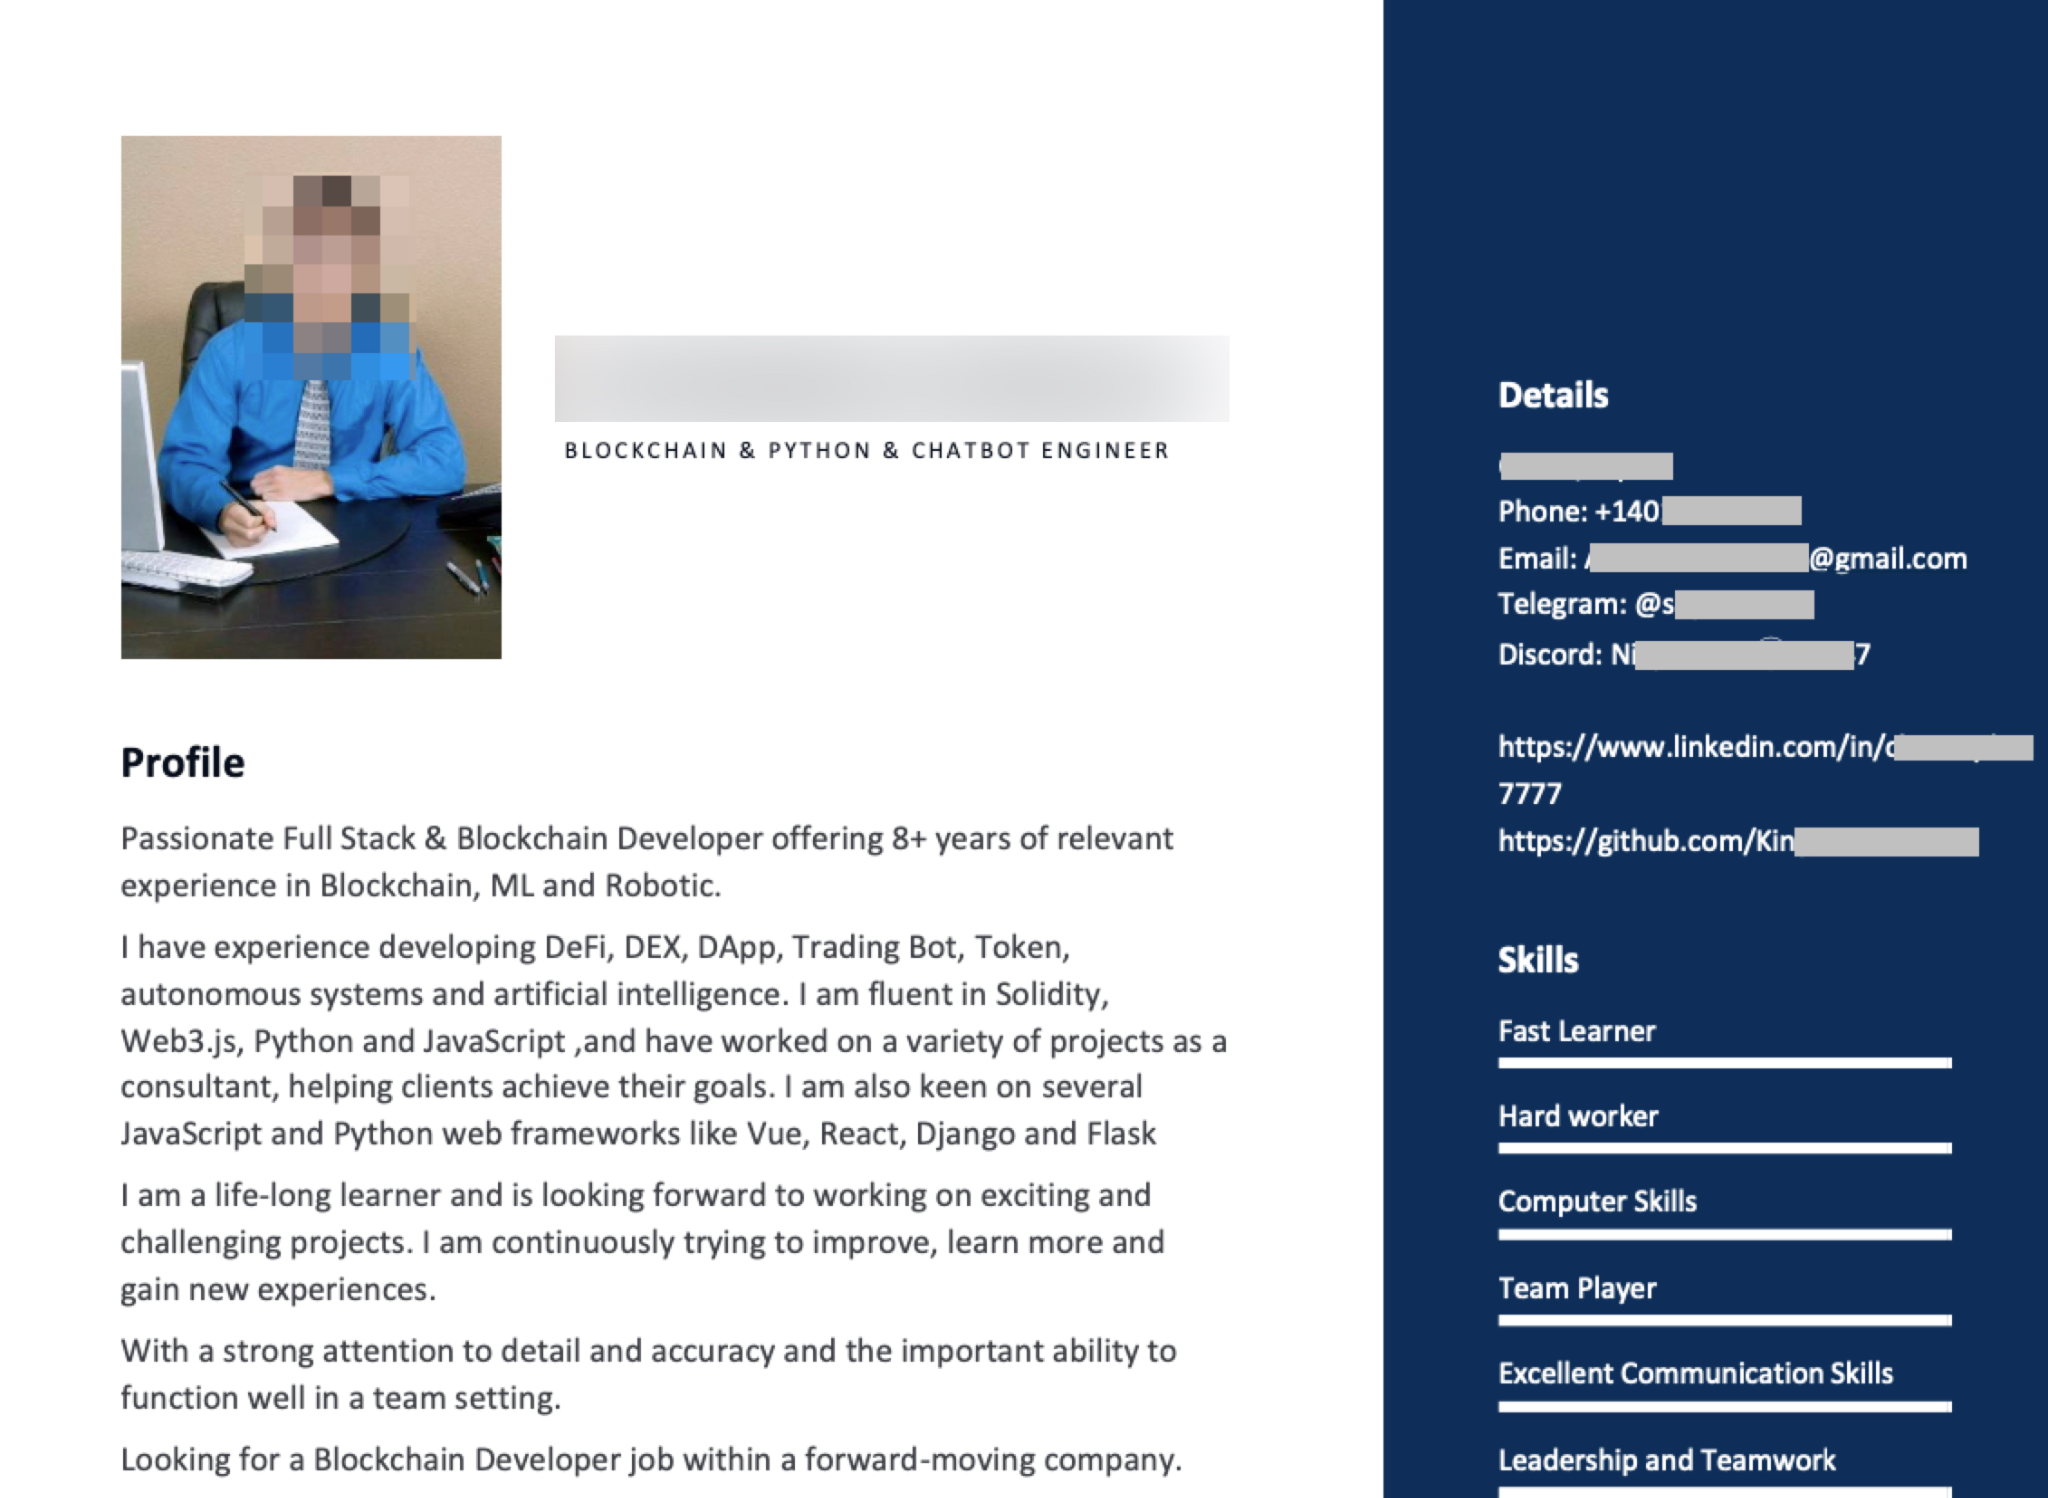 Image 9 is an example resume with some information redacted including the face of the job seeker. There is a list of skills and a full profile where the seeker indicates they want a blockchain developer role. 